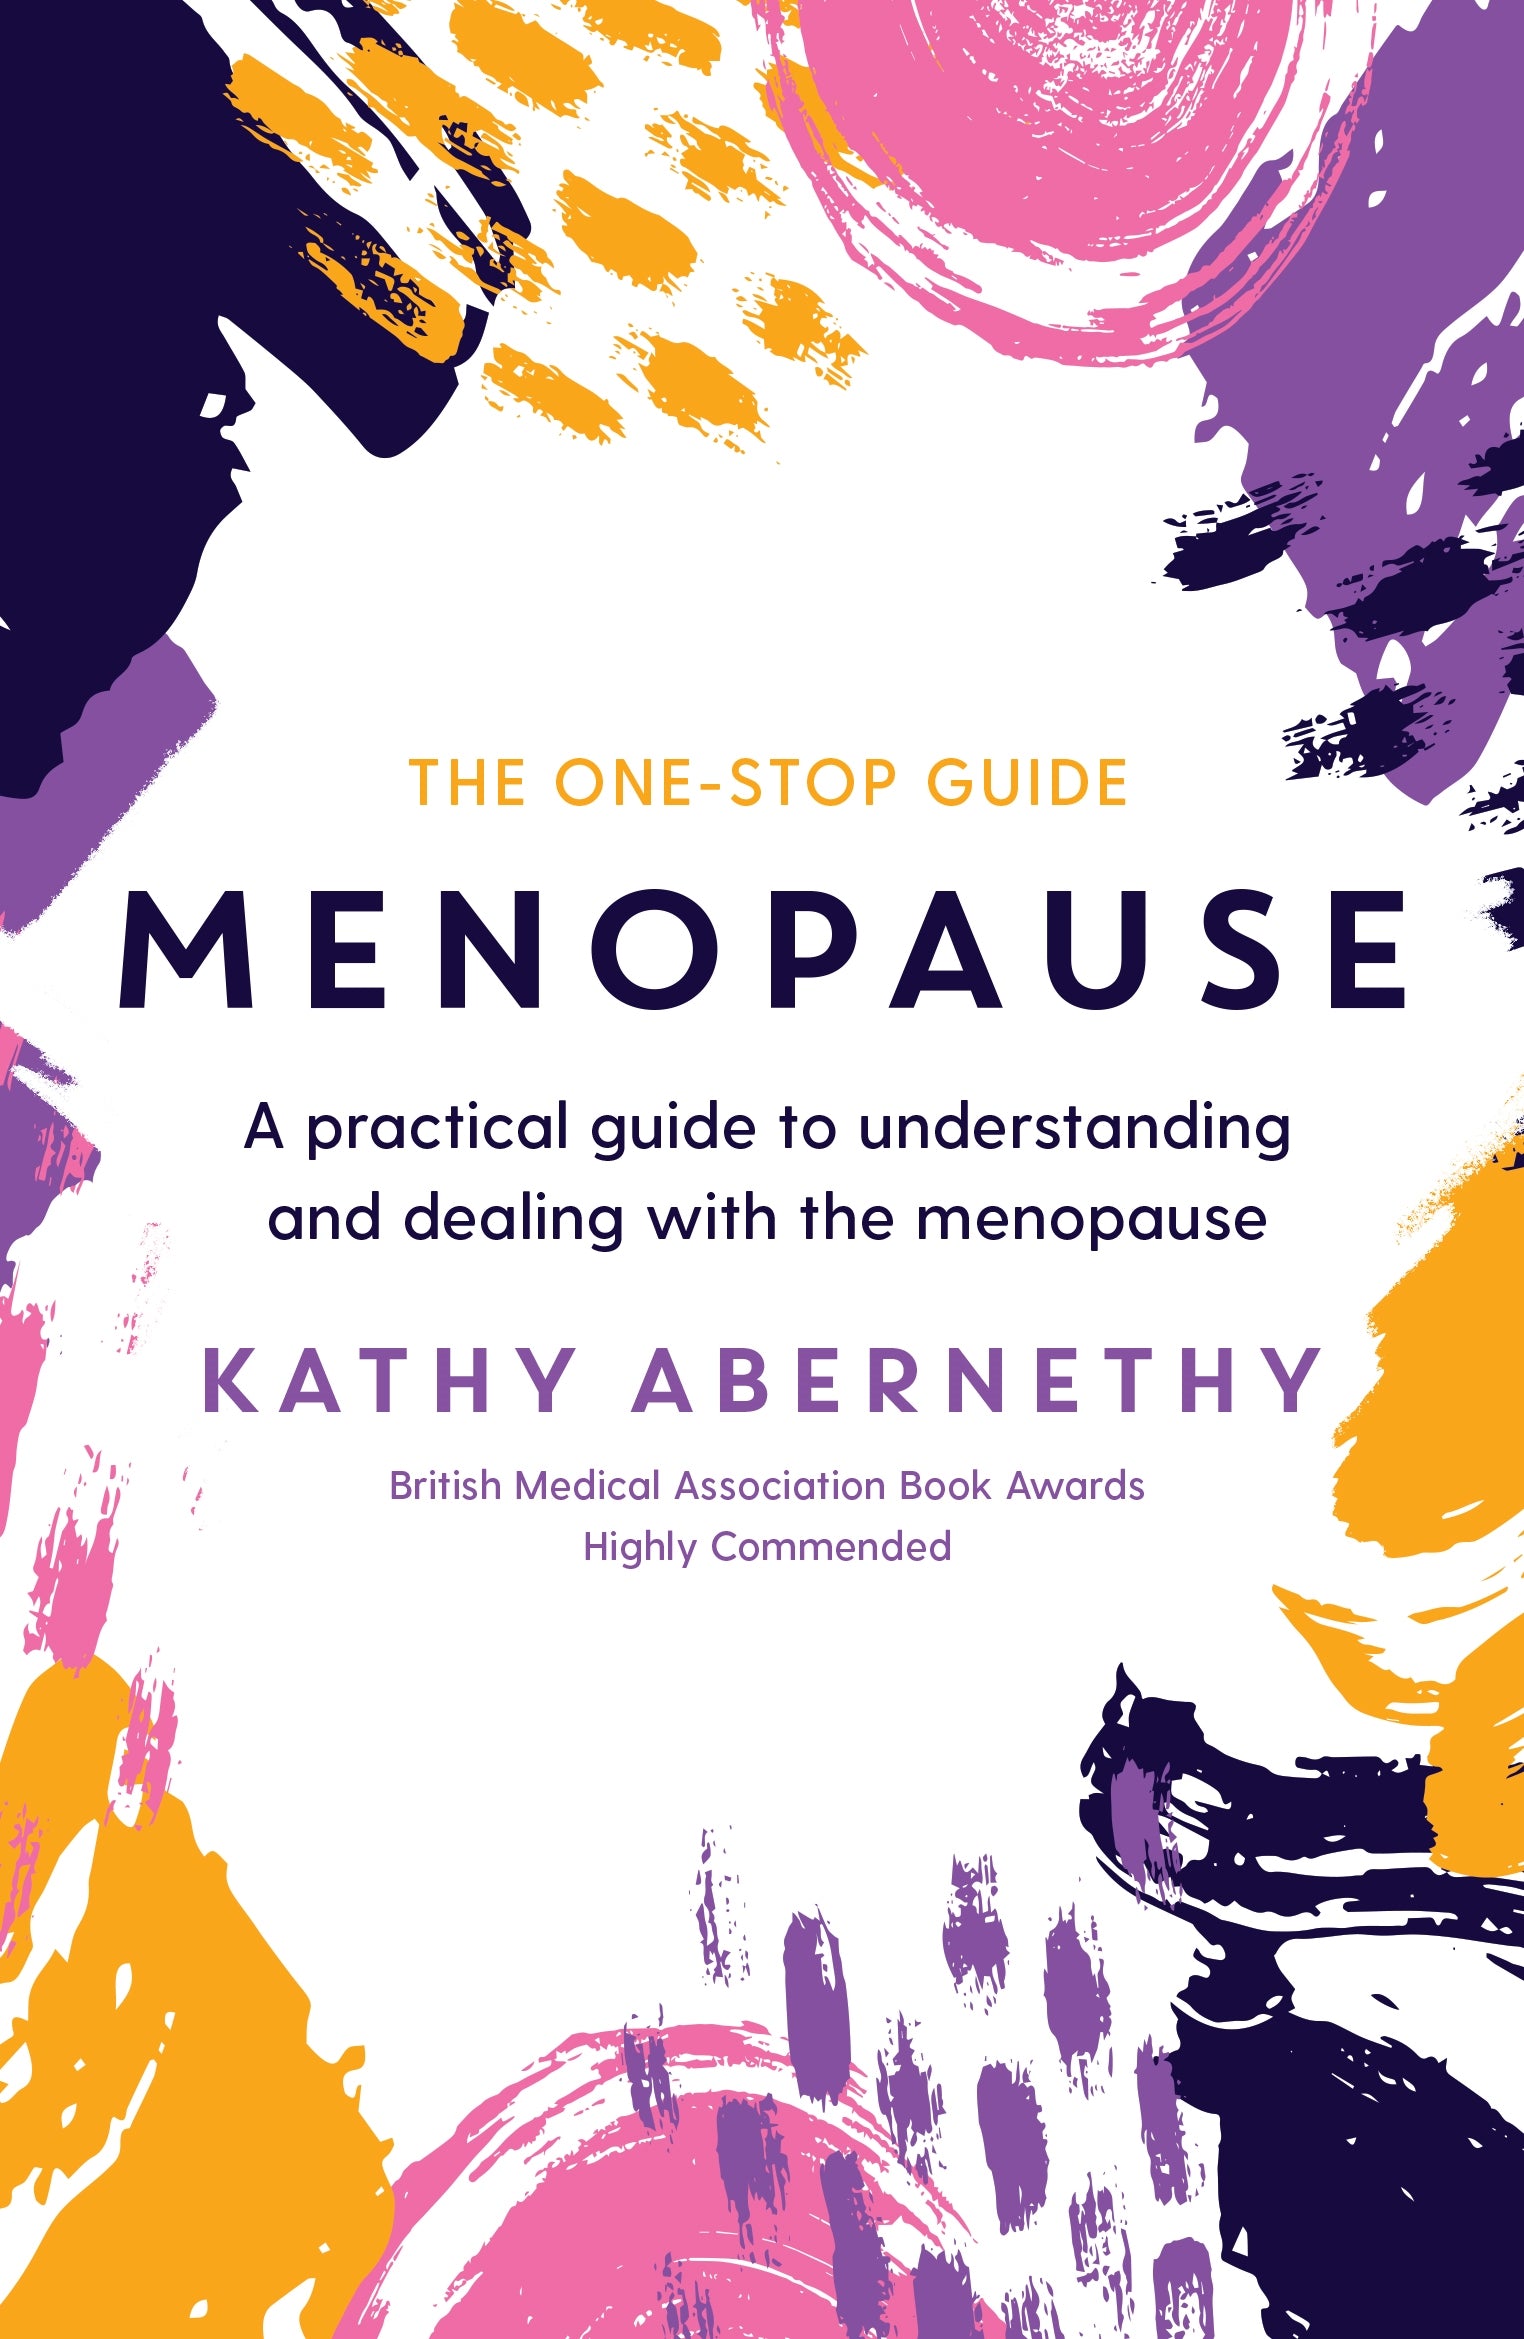 ONE STOP GUIDE TO THE MENOPAUSE BY KATHY ABERNETHY